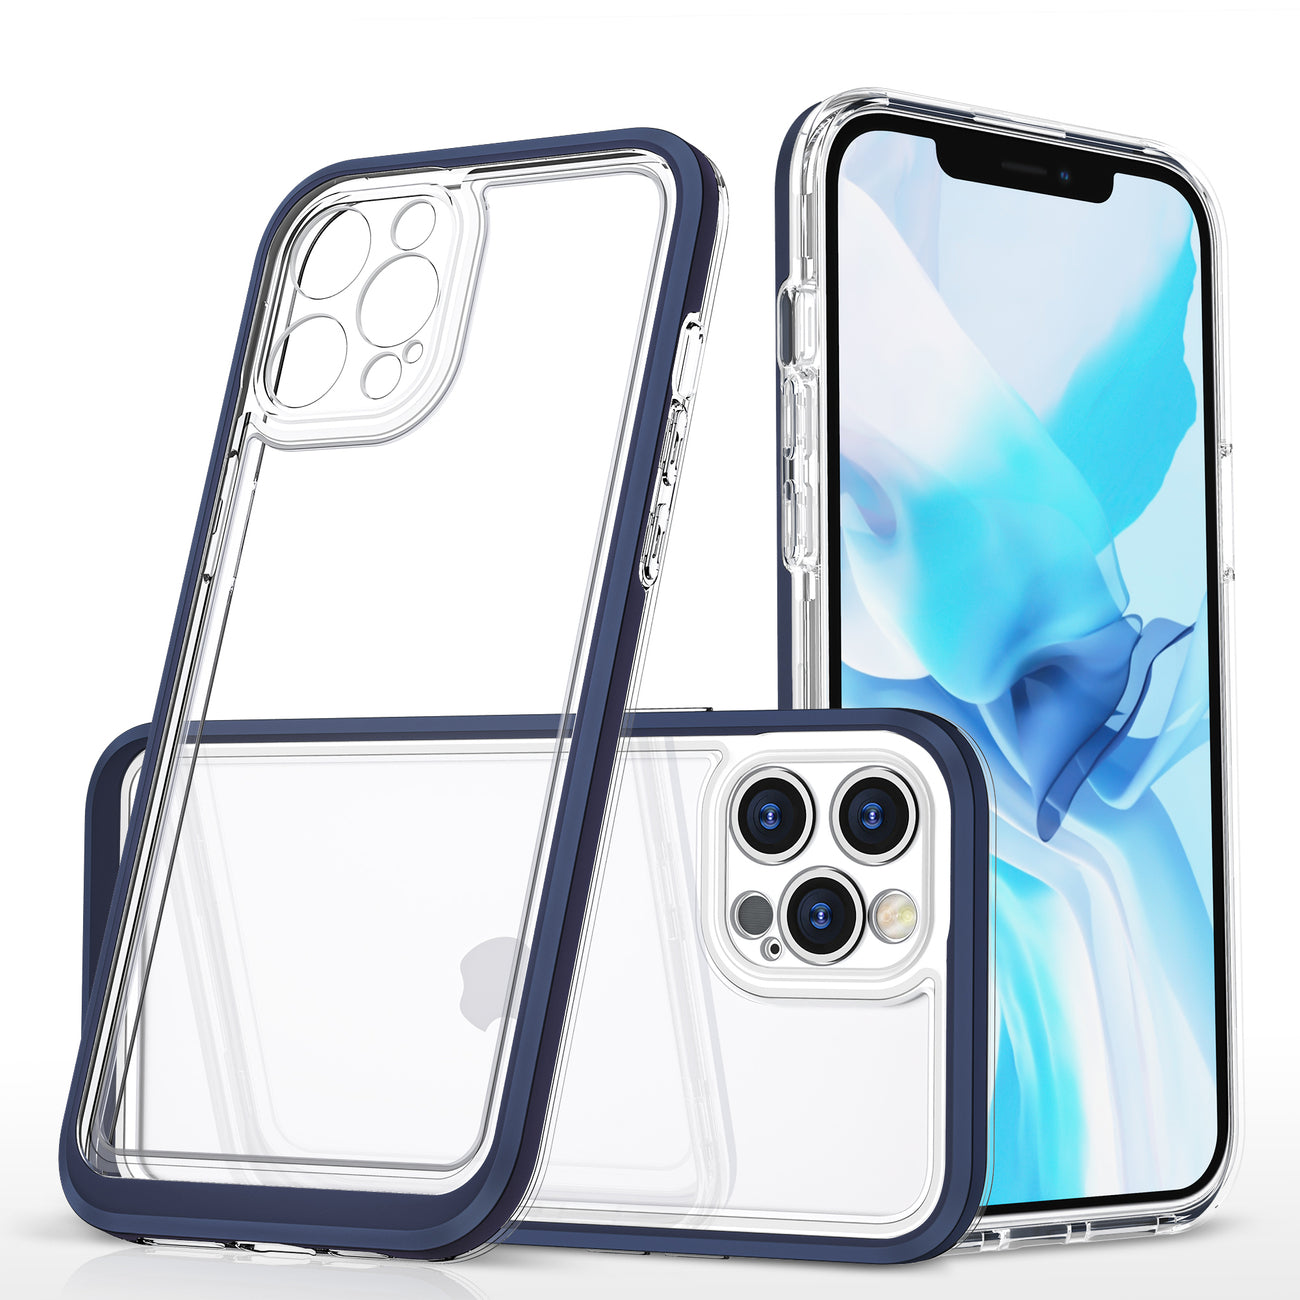 Clear 3in1 case for iPhone 12 Pro Max blue frame gel cover